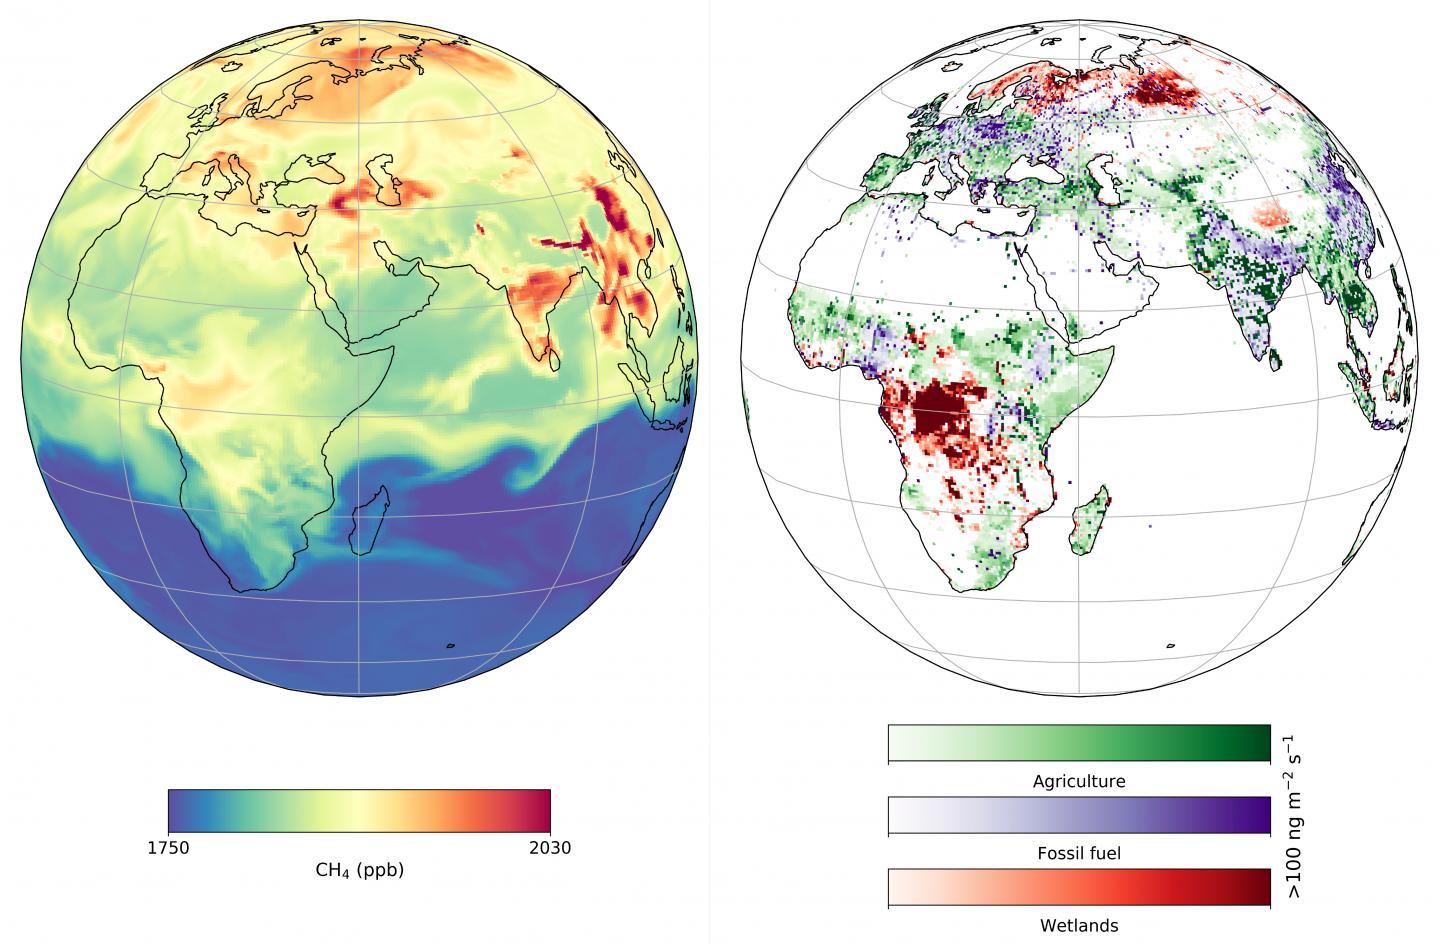 Concentrations of Methane